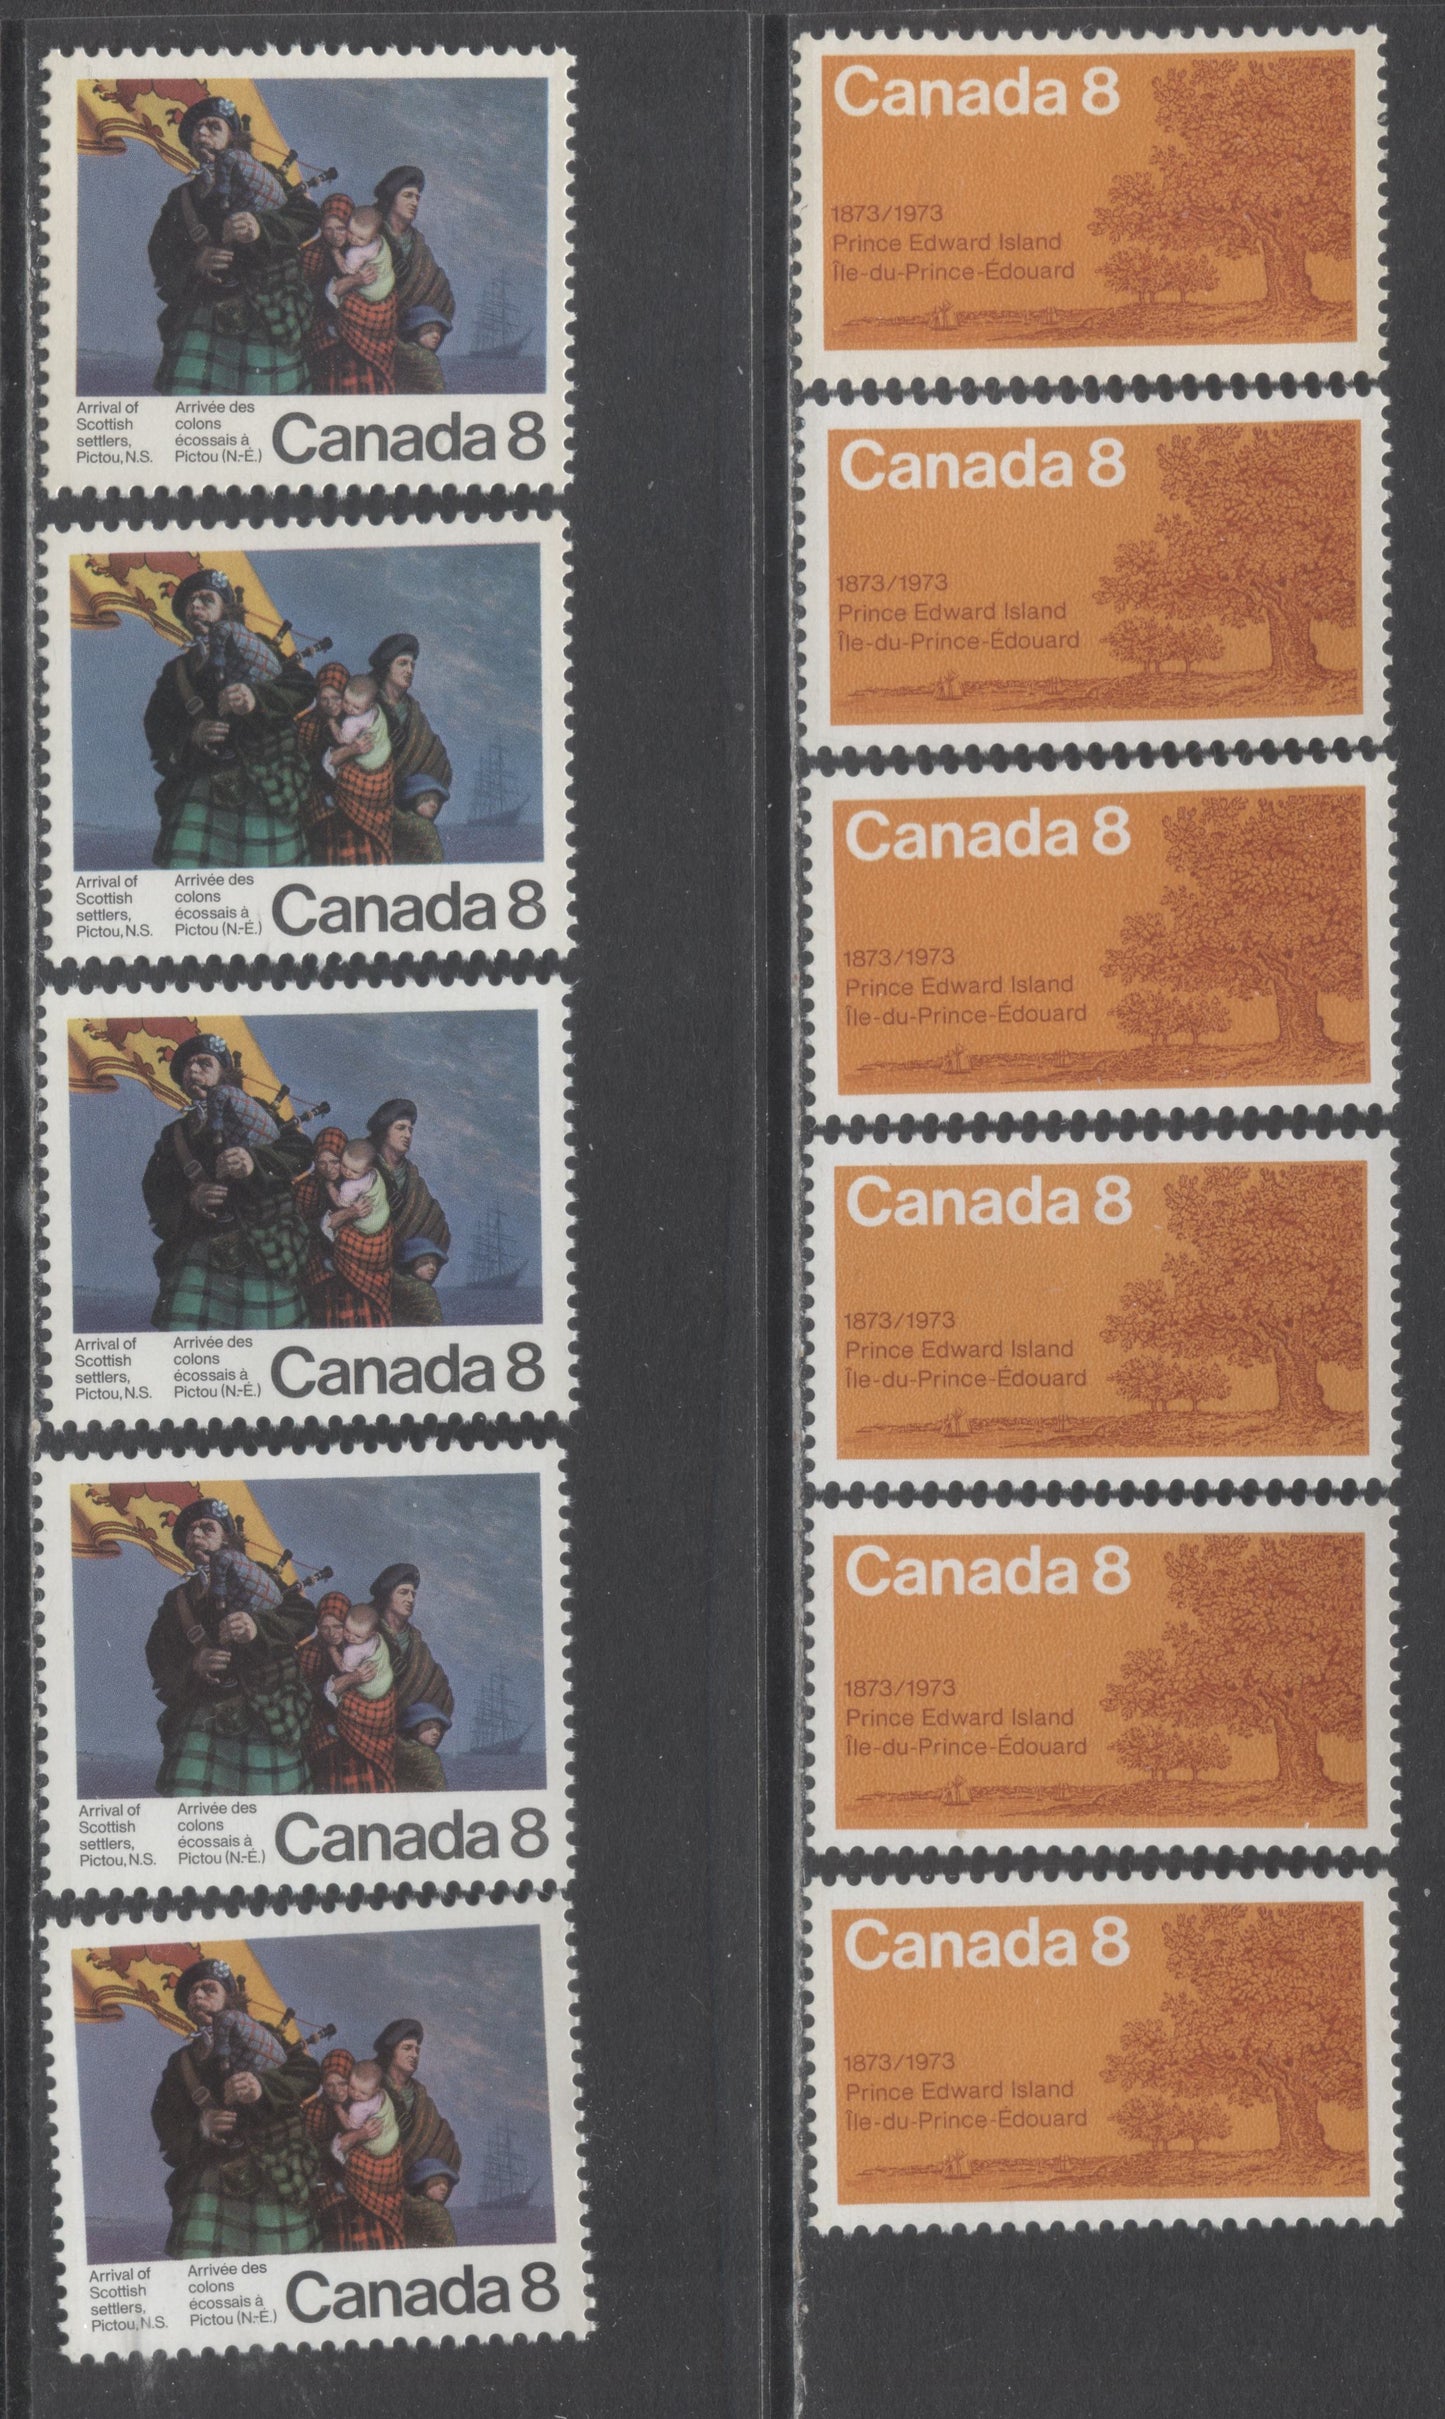 Lot 99 Canada #618-619 8c Multicolored Oak Tree & Scottish Settlers, 1973 PEI Centennial & Scottish Settler Issues, 11 VFNH Singles On Various Papers